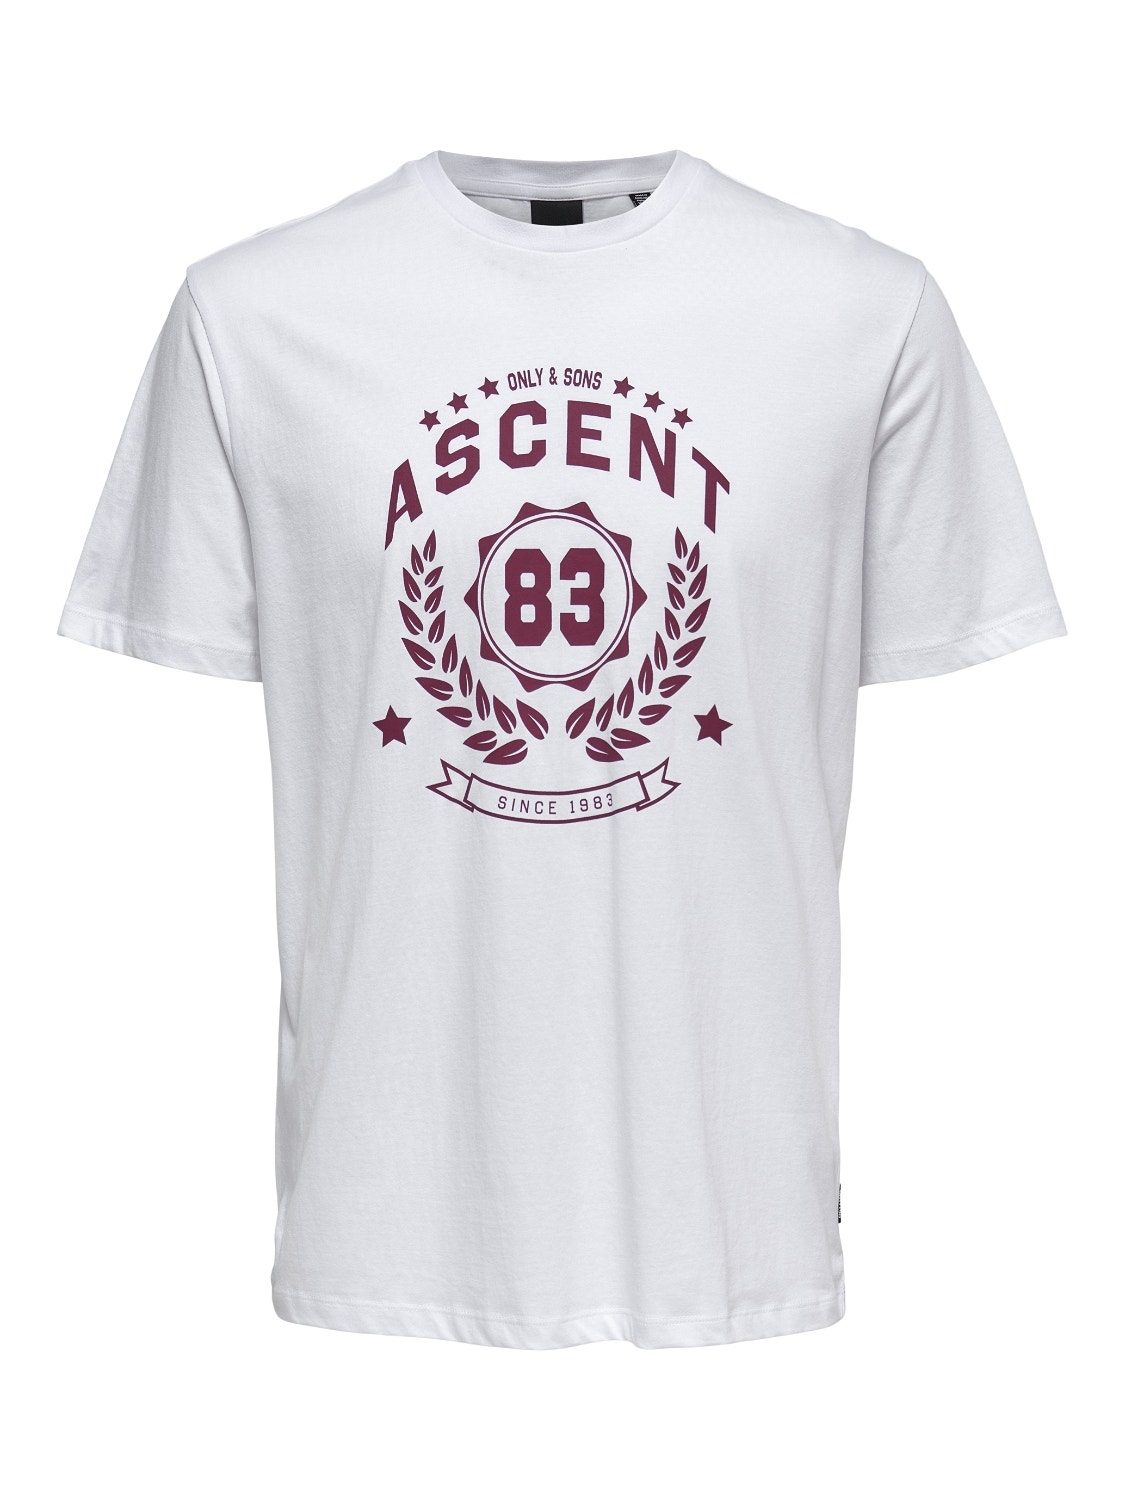 T-Shirt 40% O-Neck | Regular SONS® with Fit discount! & ONLY